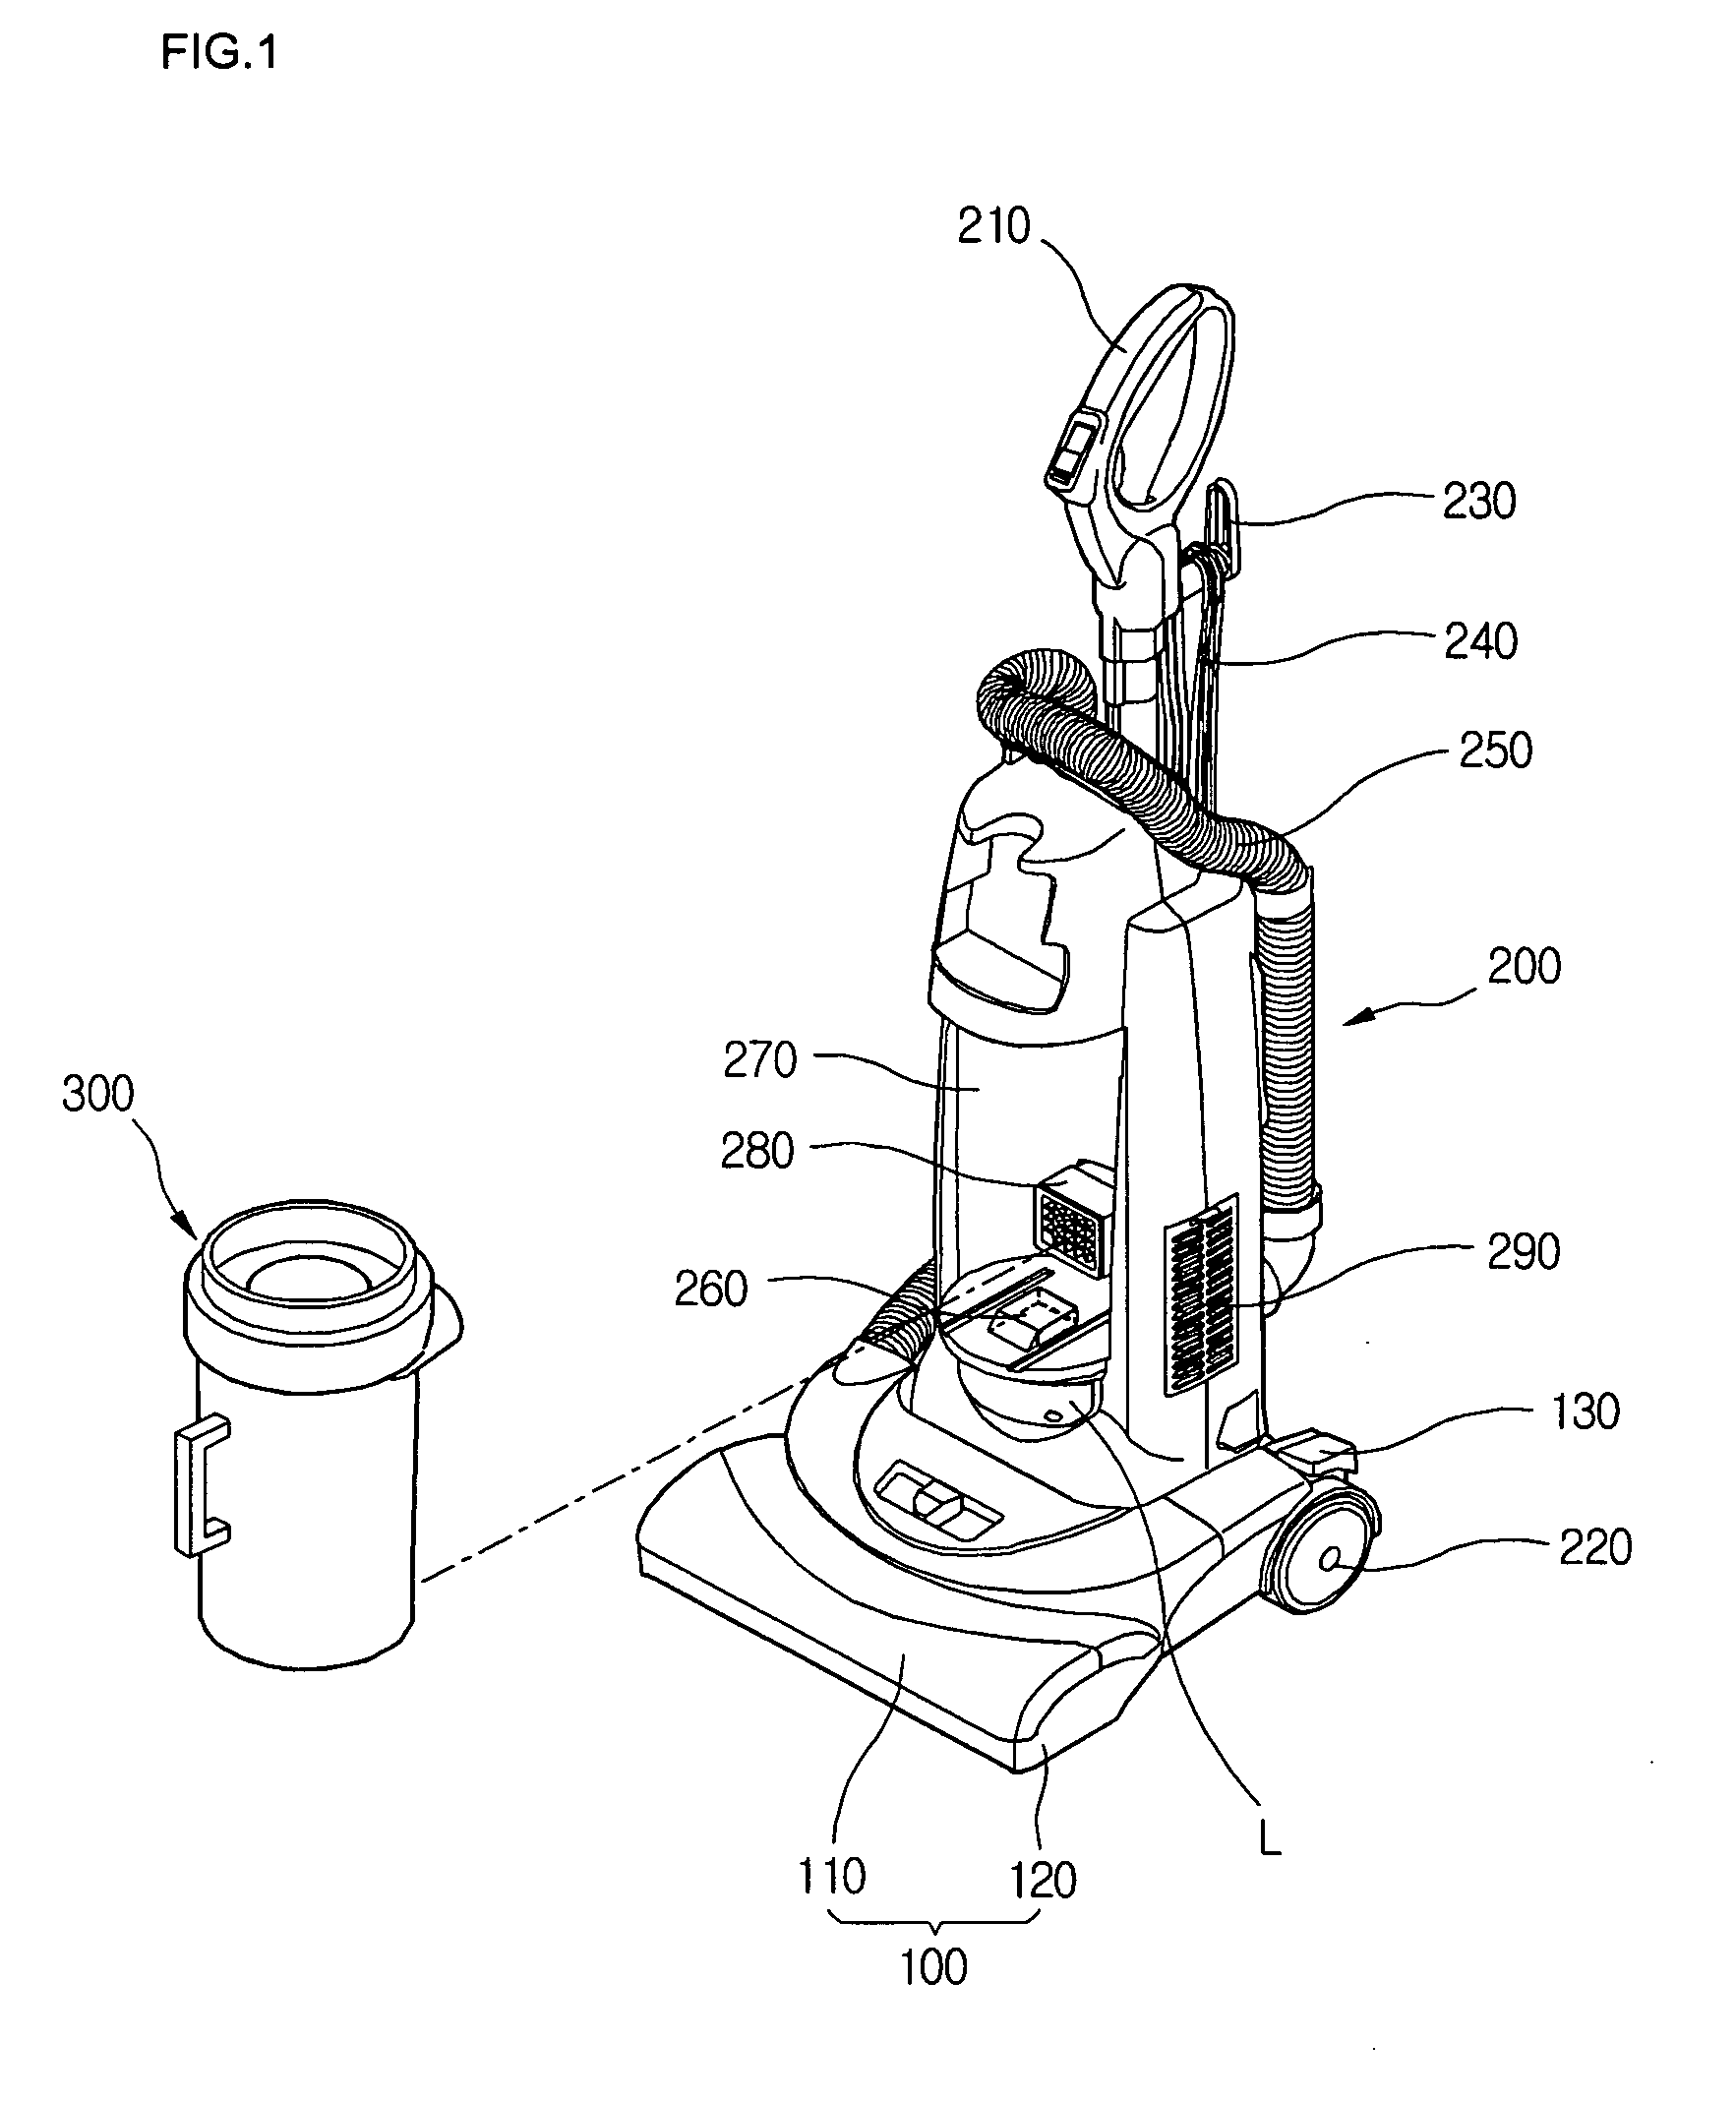 Apparatus of mounting dust collection unit for vacuum cleaner